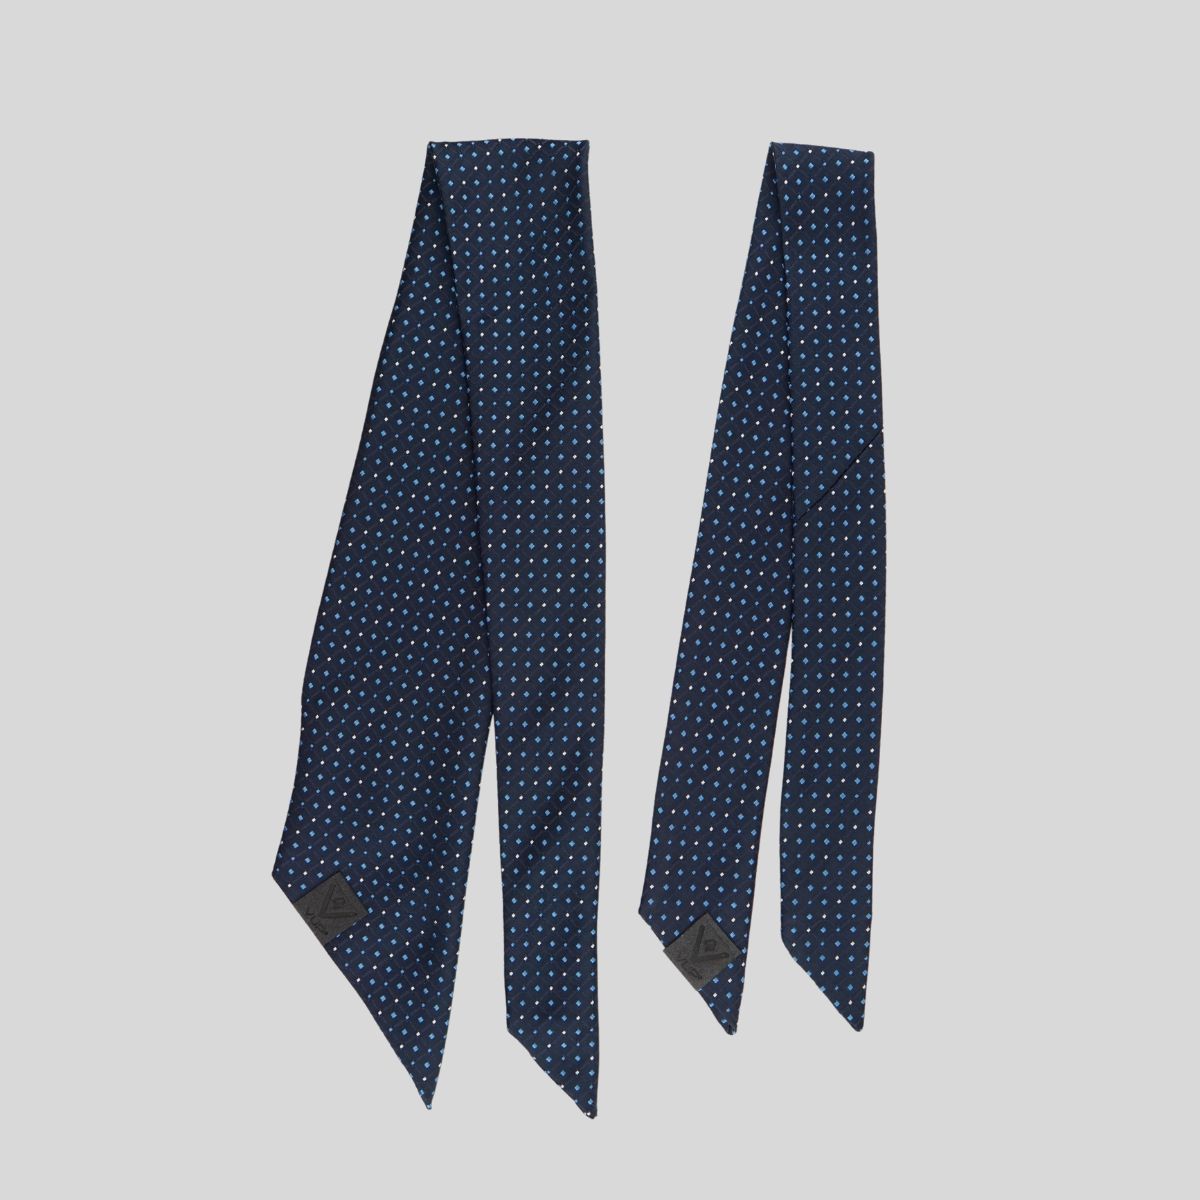 Mini VUP® Alexis-1, tie replacement, twilly, foulard, pocket square, all-in-one accessory, VUP Fashion AG